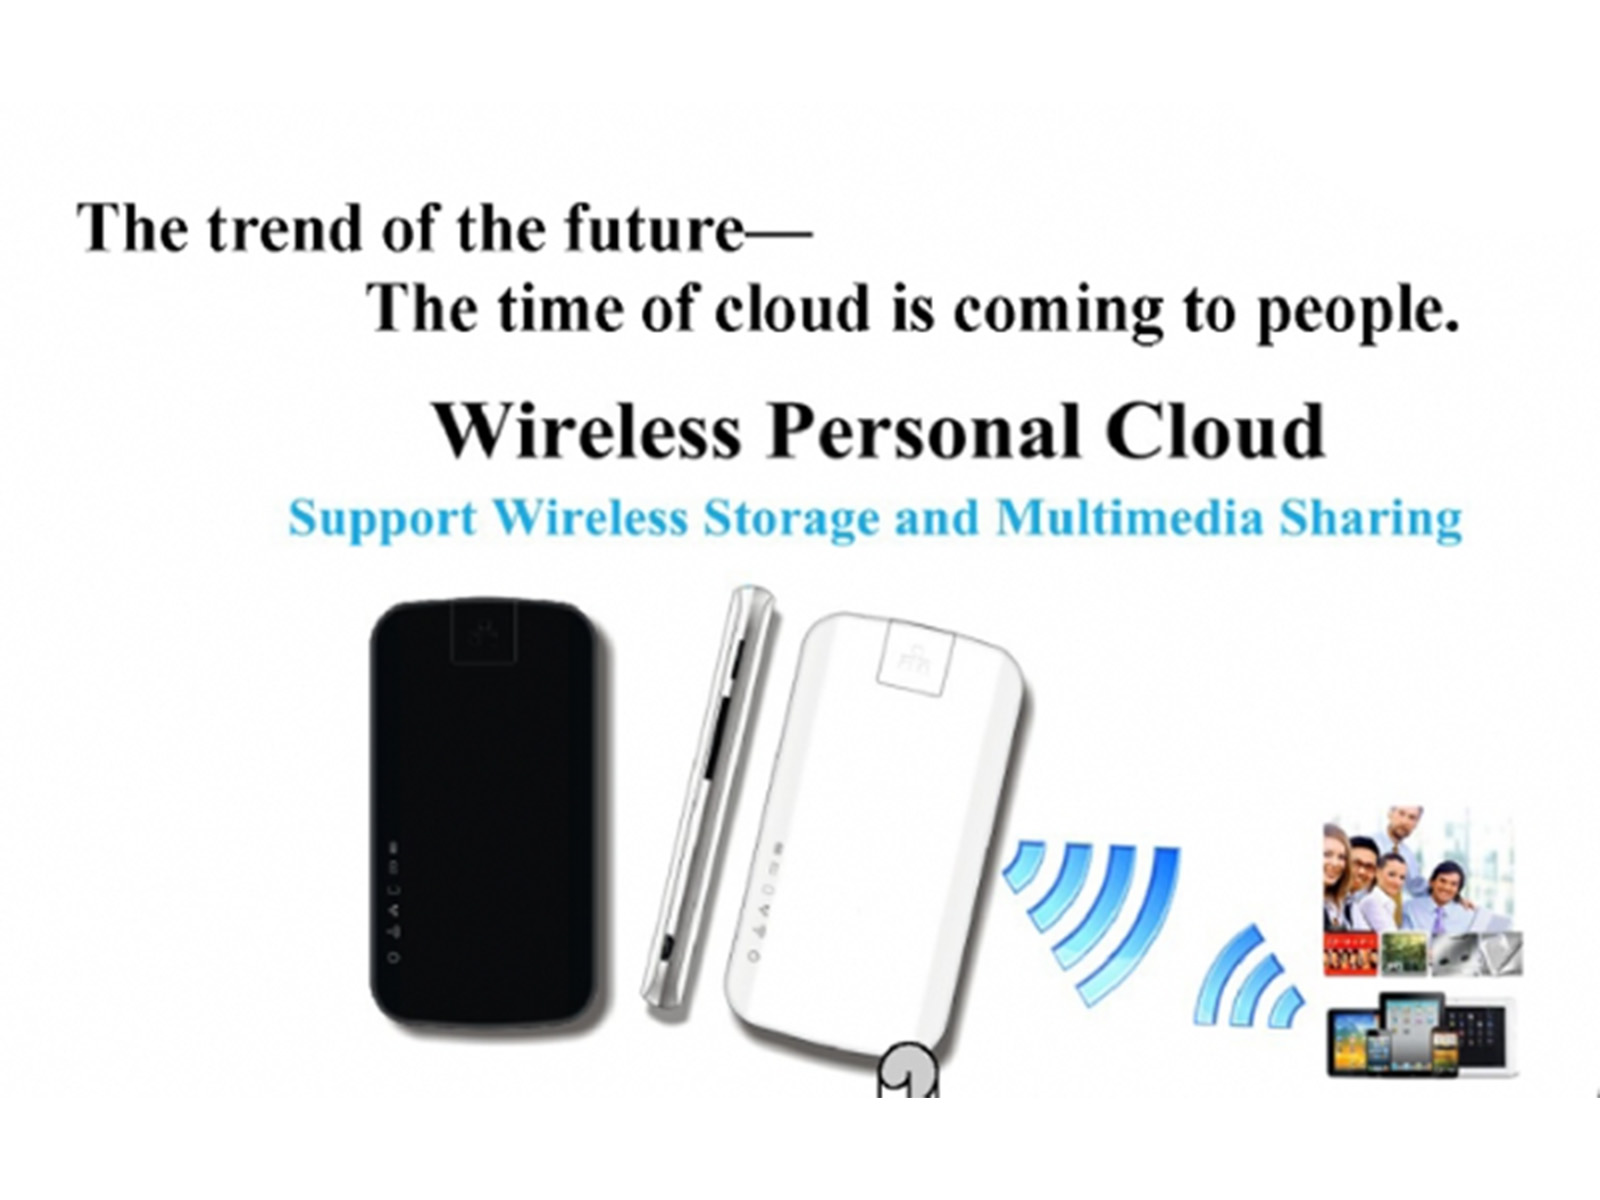 Wireless Personal Cloud - Upcoming Cloud Trend!